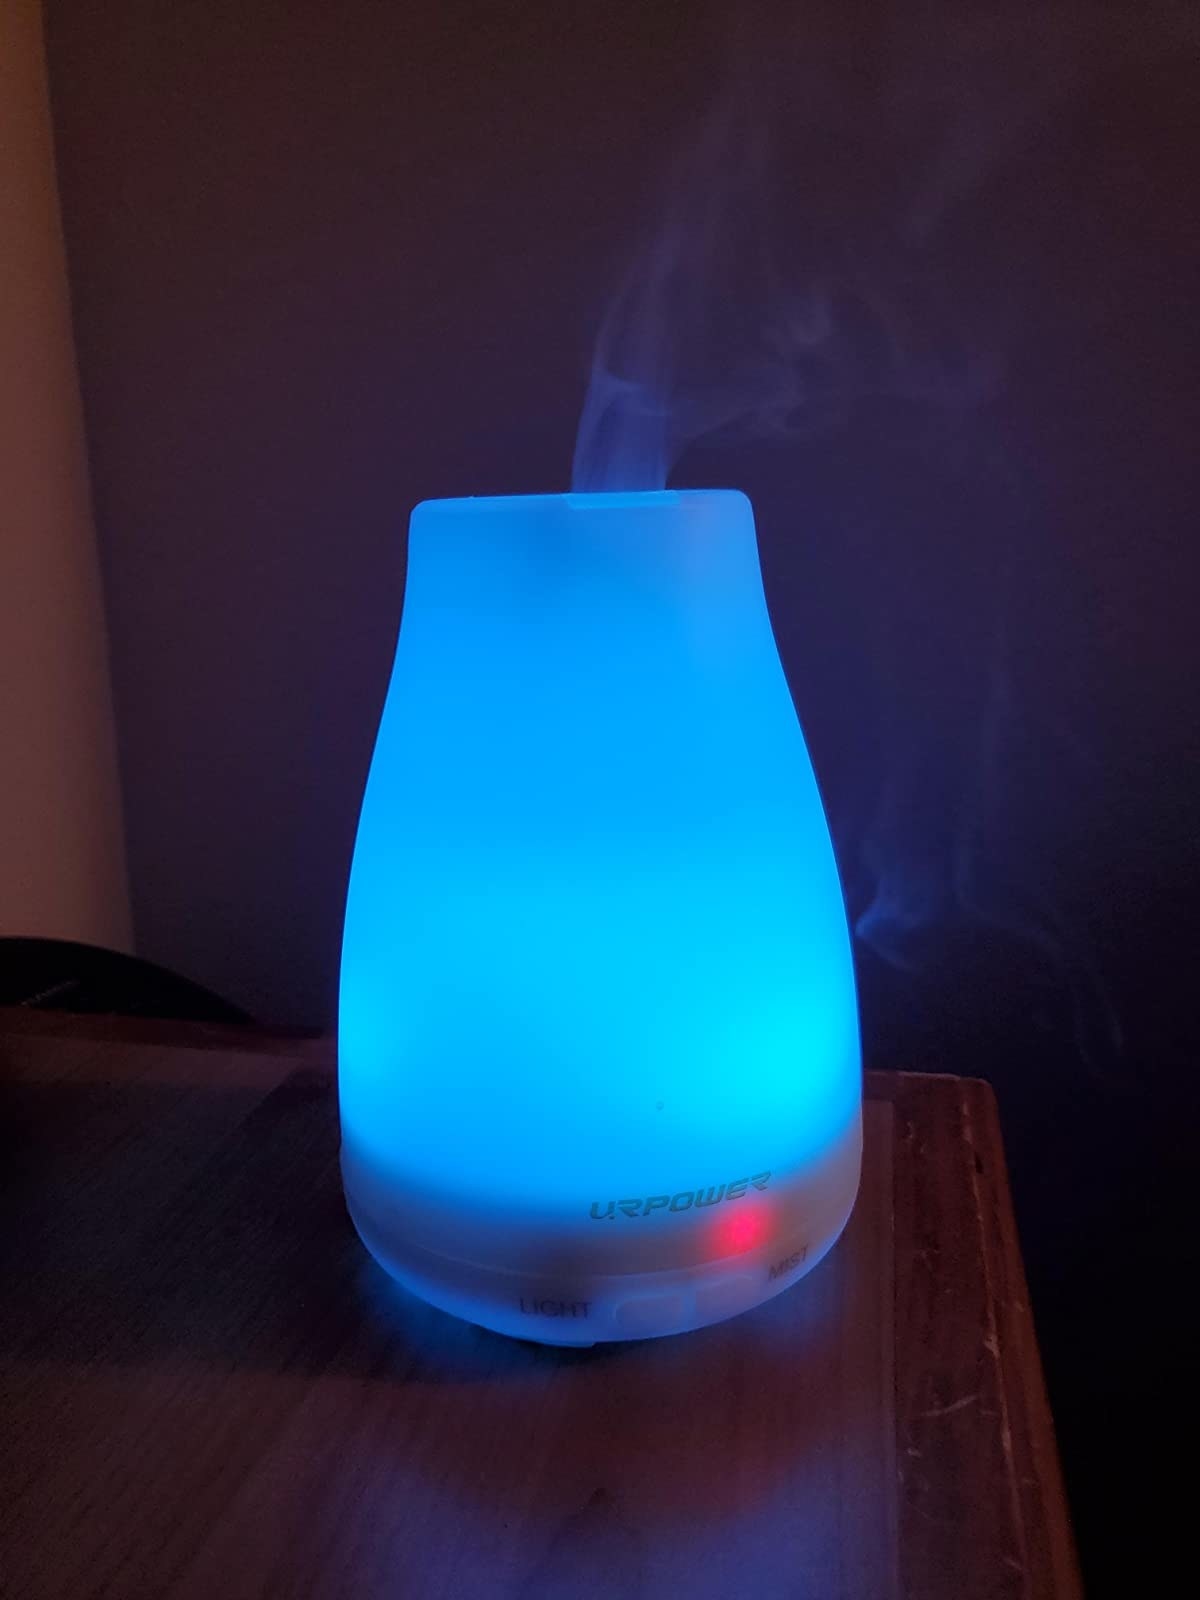 Reviewer image of the diffuser set to the color blue